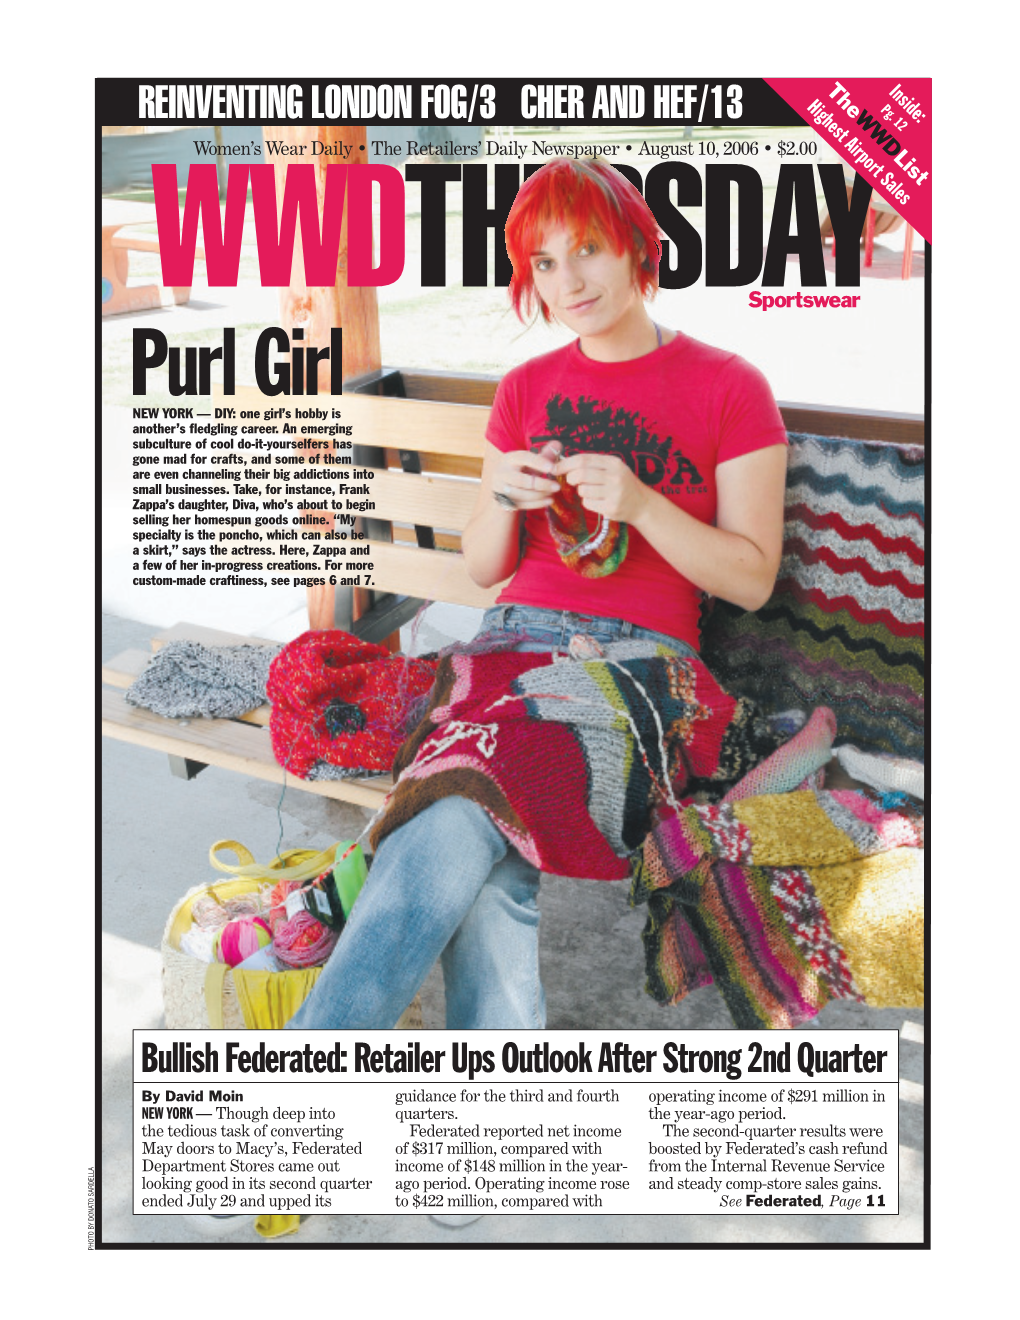 Purl Girl NEW YORK — DIY: One Girl’S Hobby Is Another’S ﬂ Edgling Career